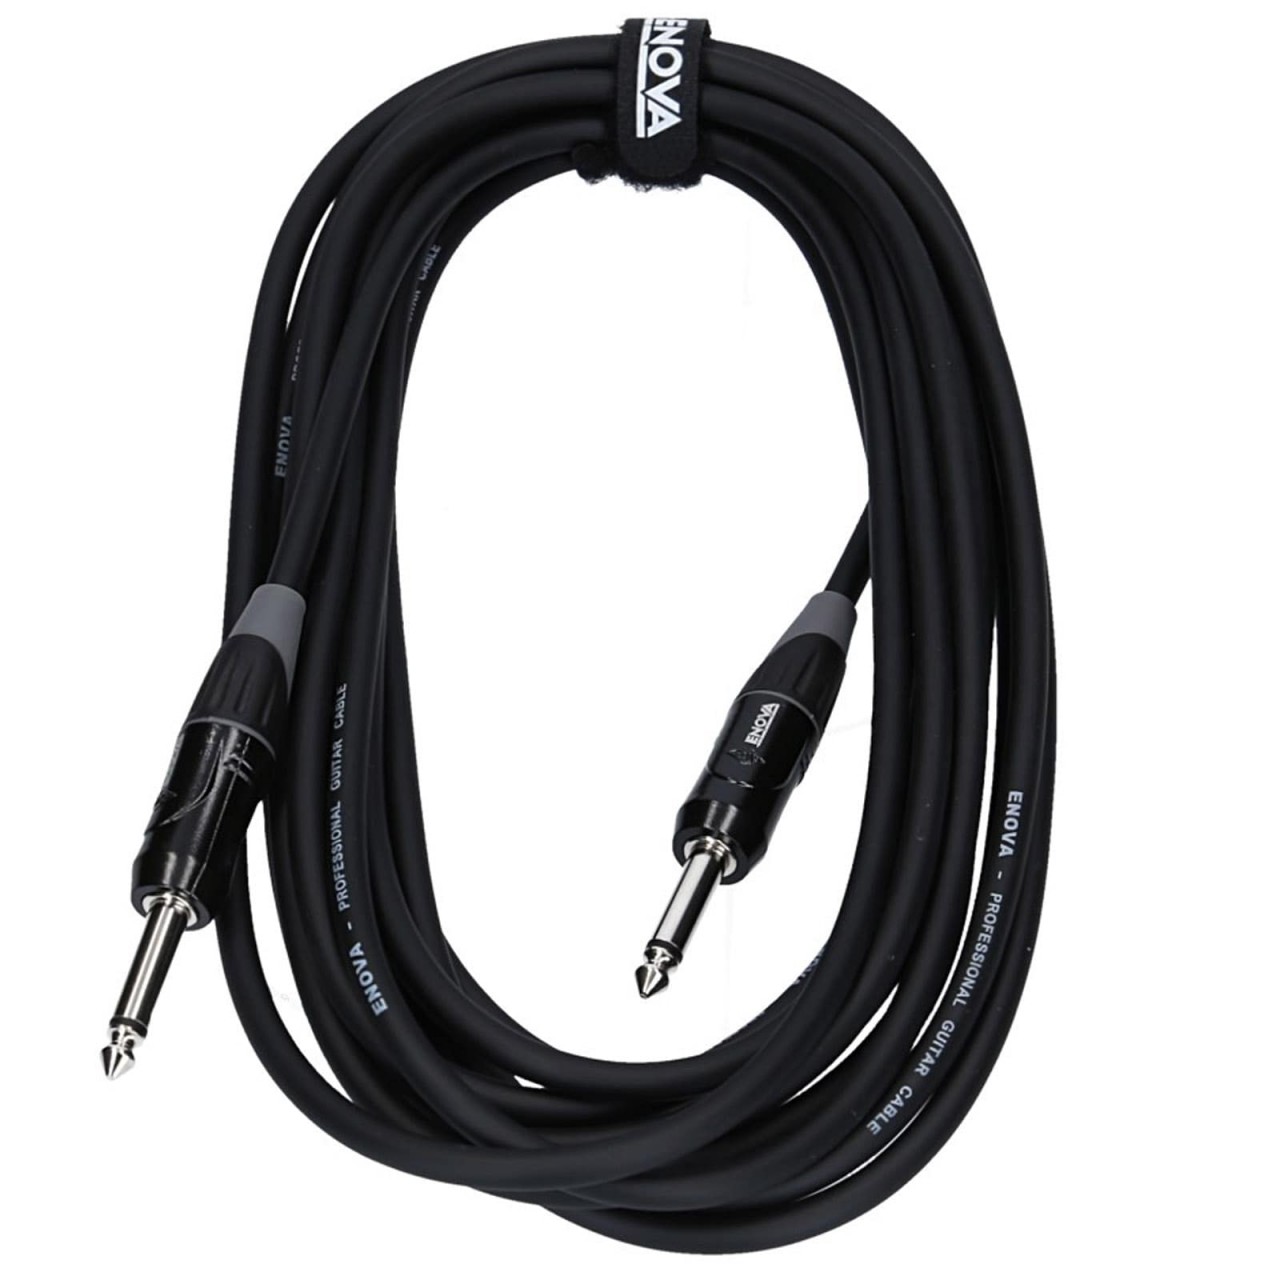 4 meter guitar cable - cable technology from Enova Audio Kabel - professional cable for guitarists